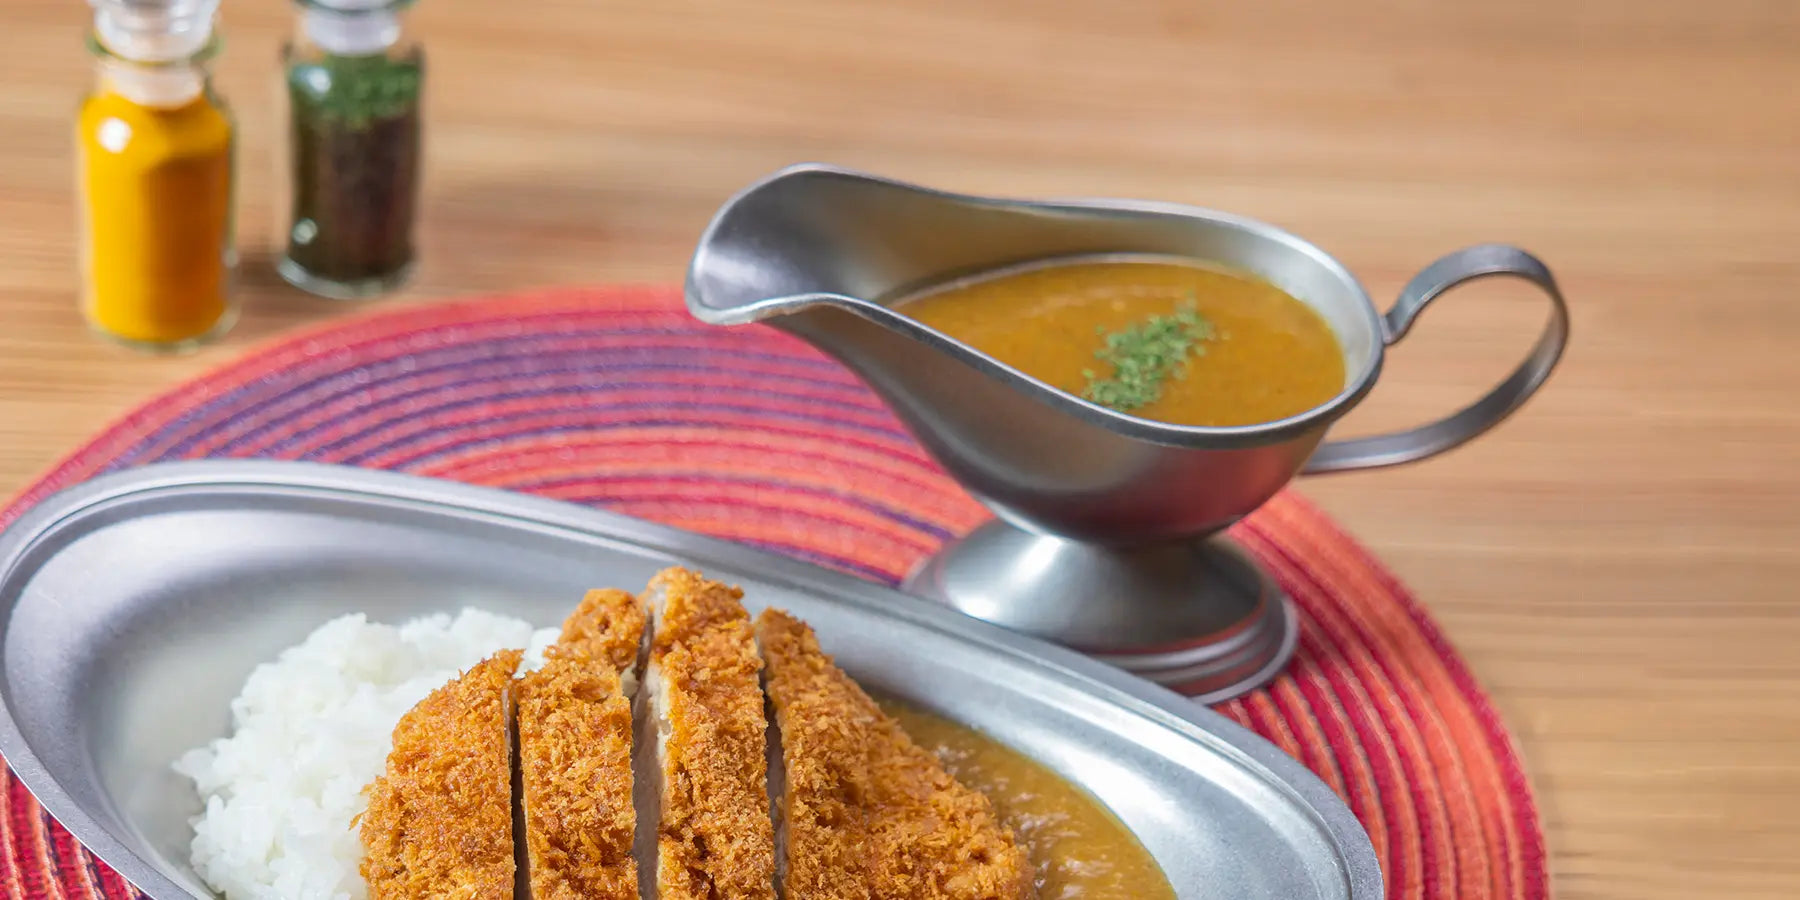 Discover our great selection of Gravy Boats at Globalkitchen Japan.